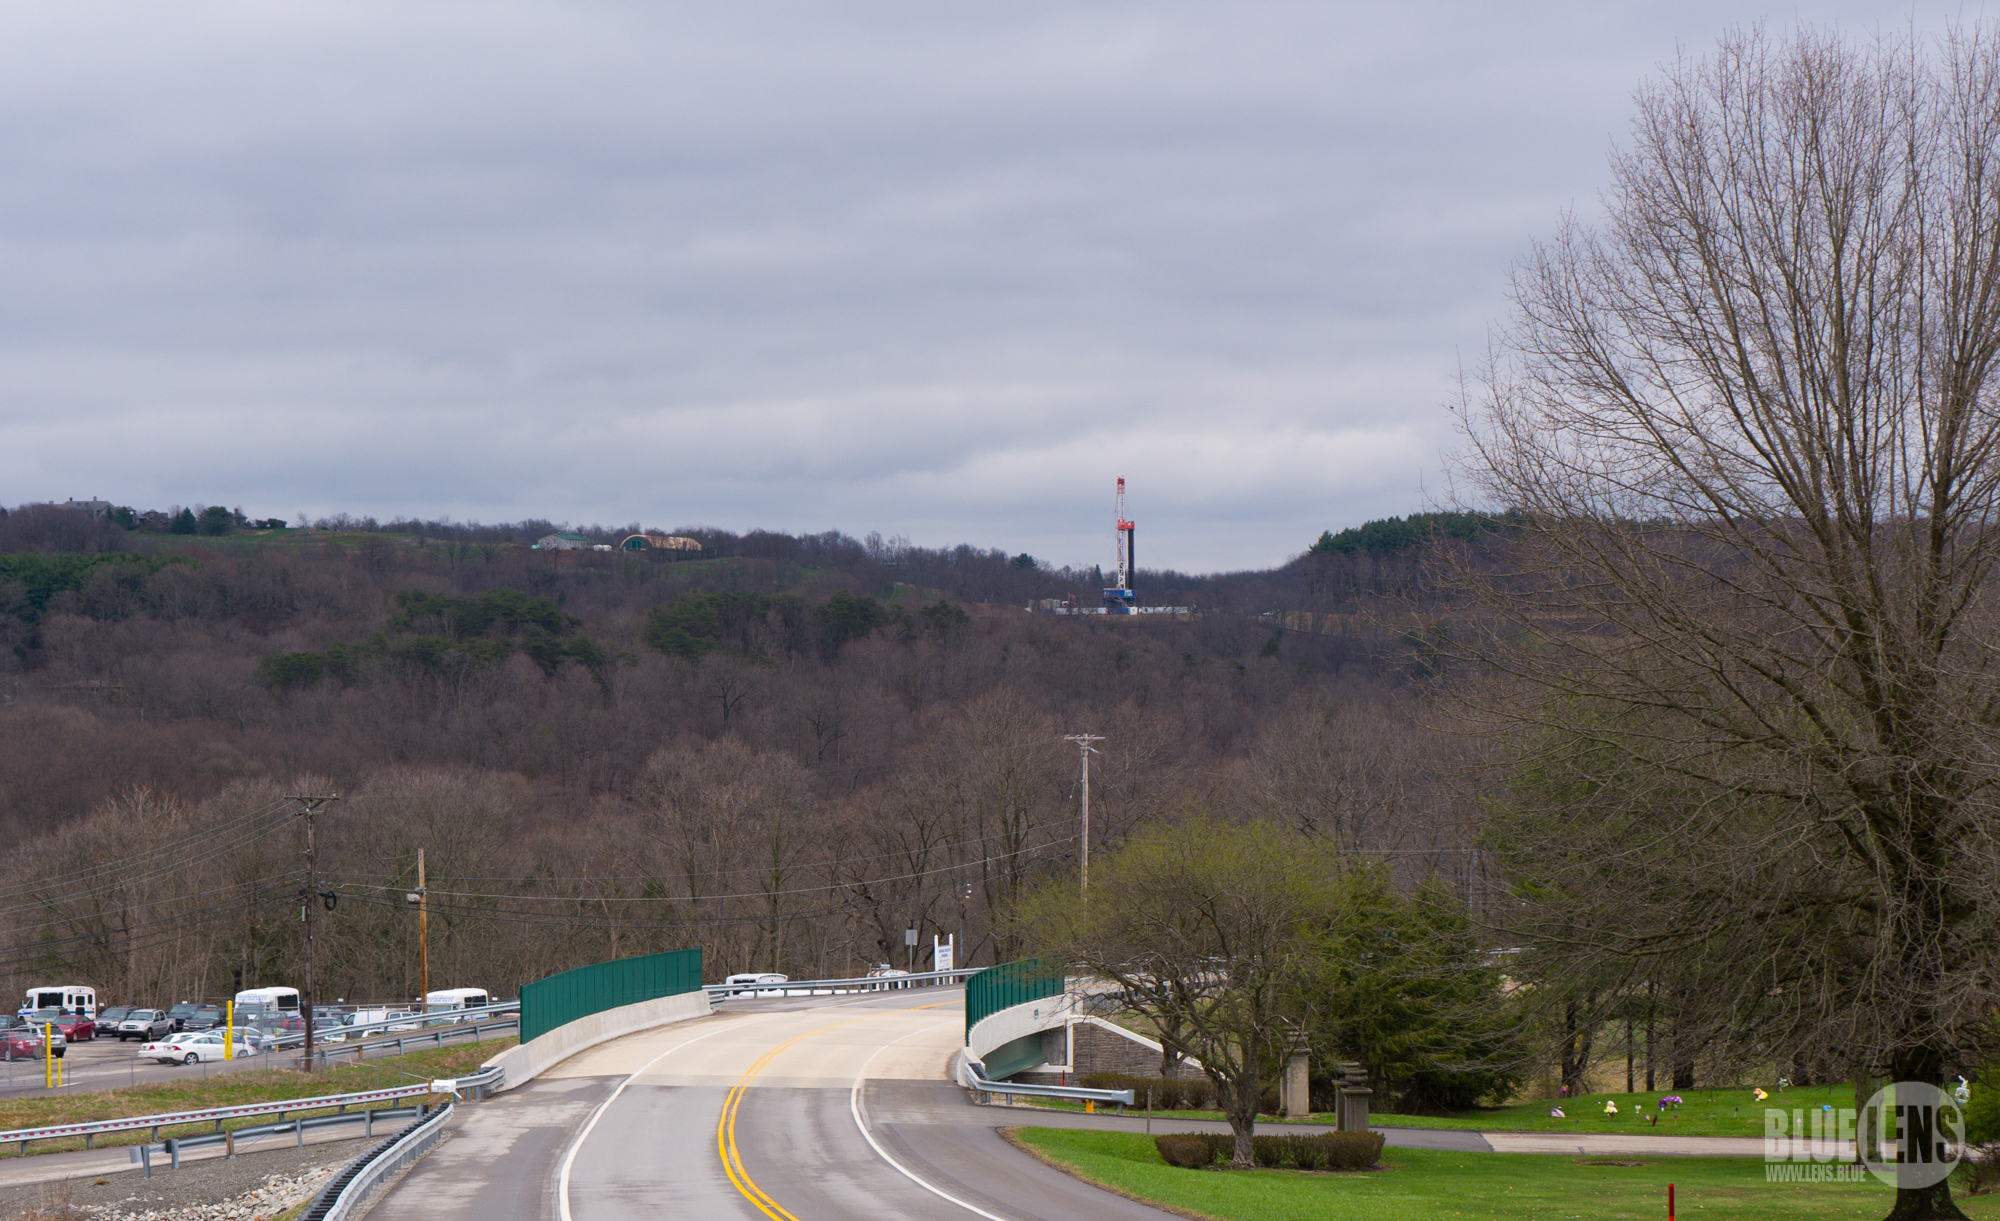 A photograph shows a rural landscape, and on the hill in the distance is a large, high tech drill.